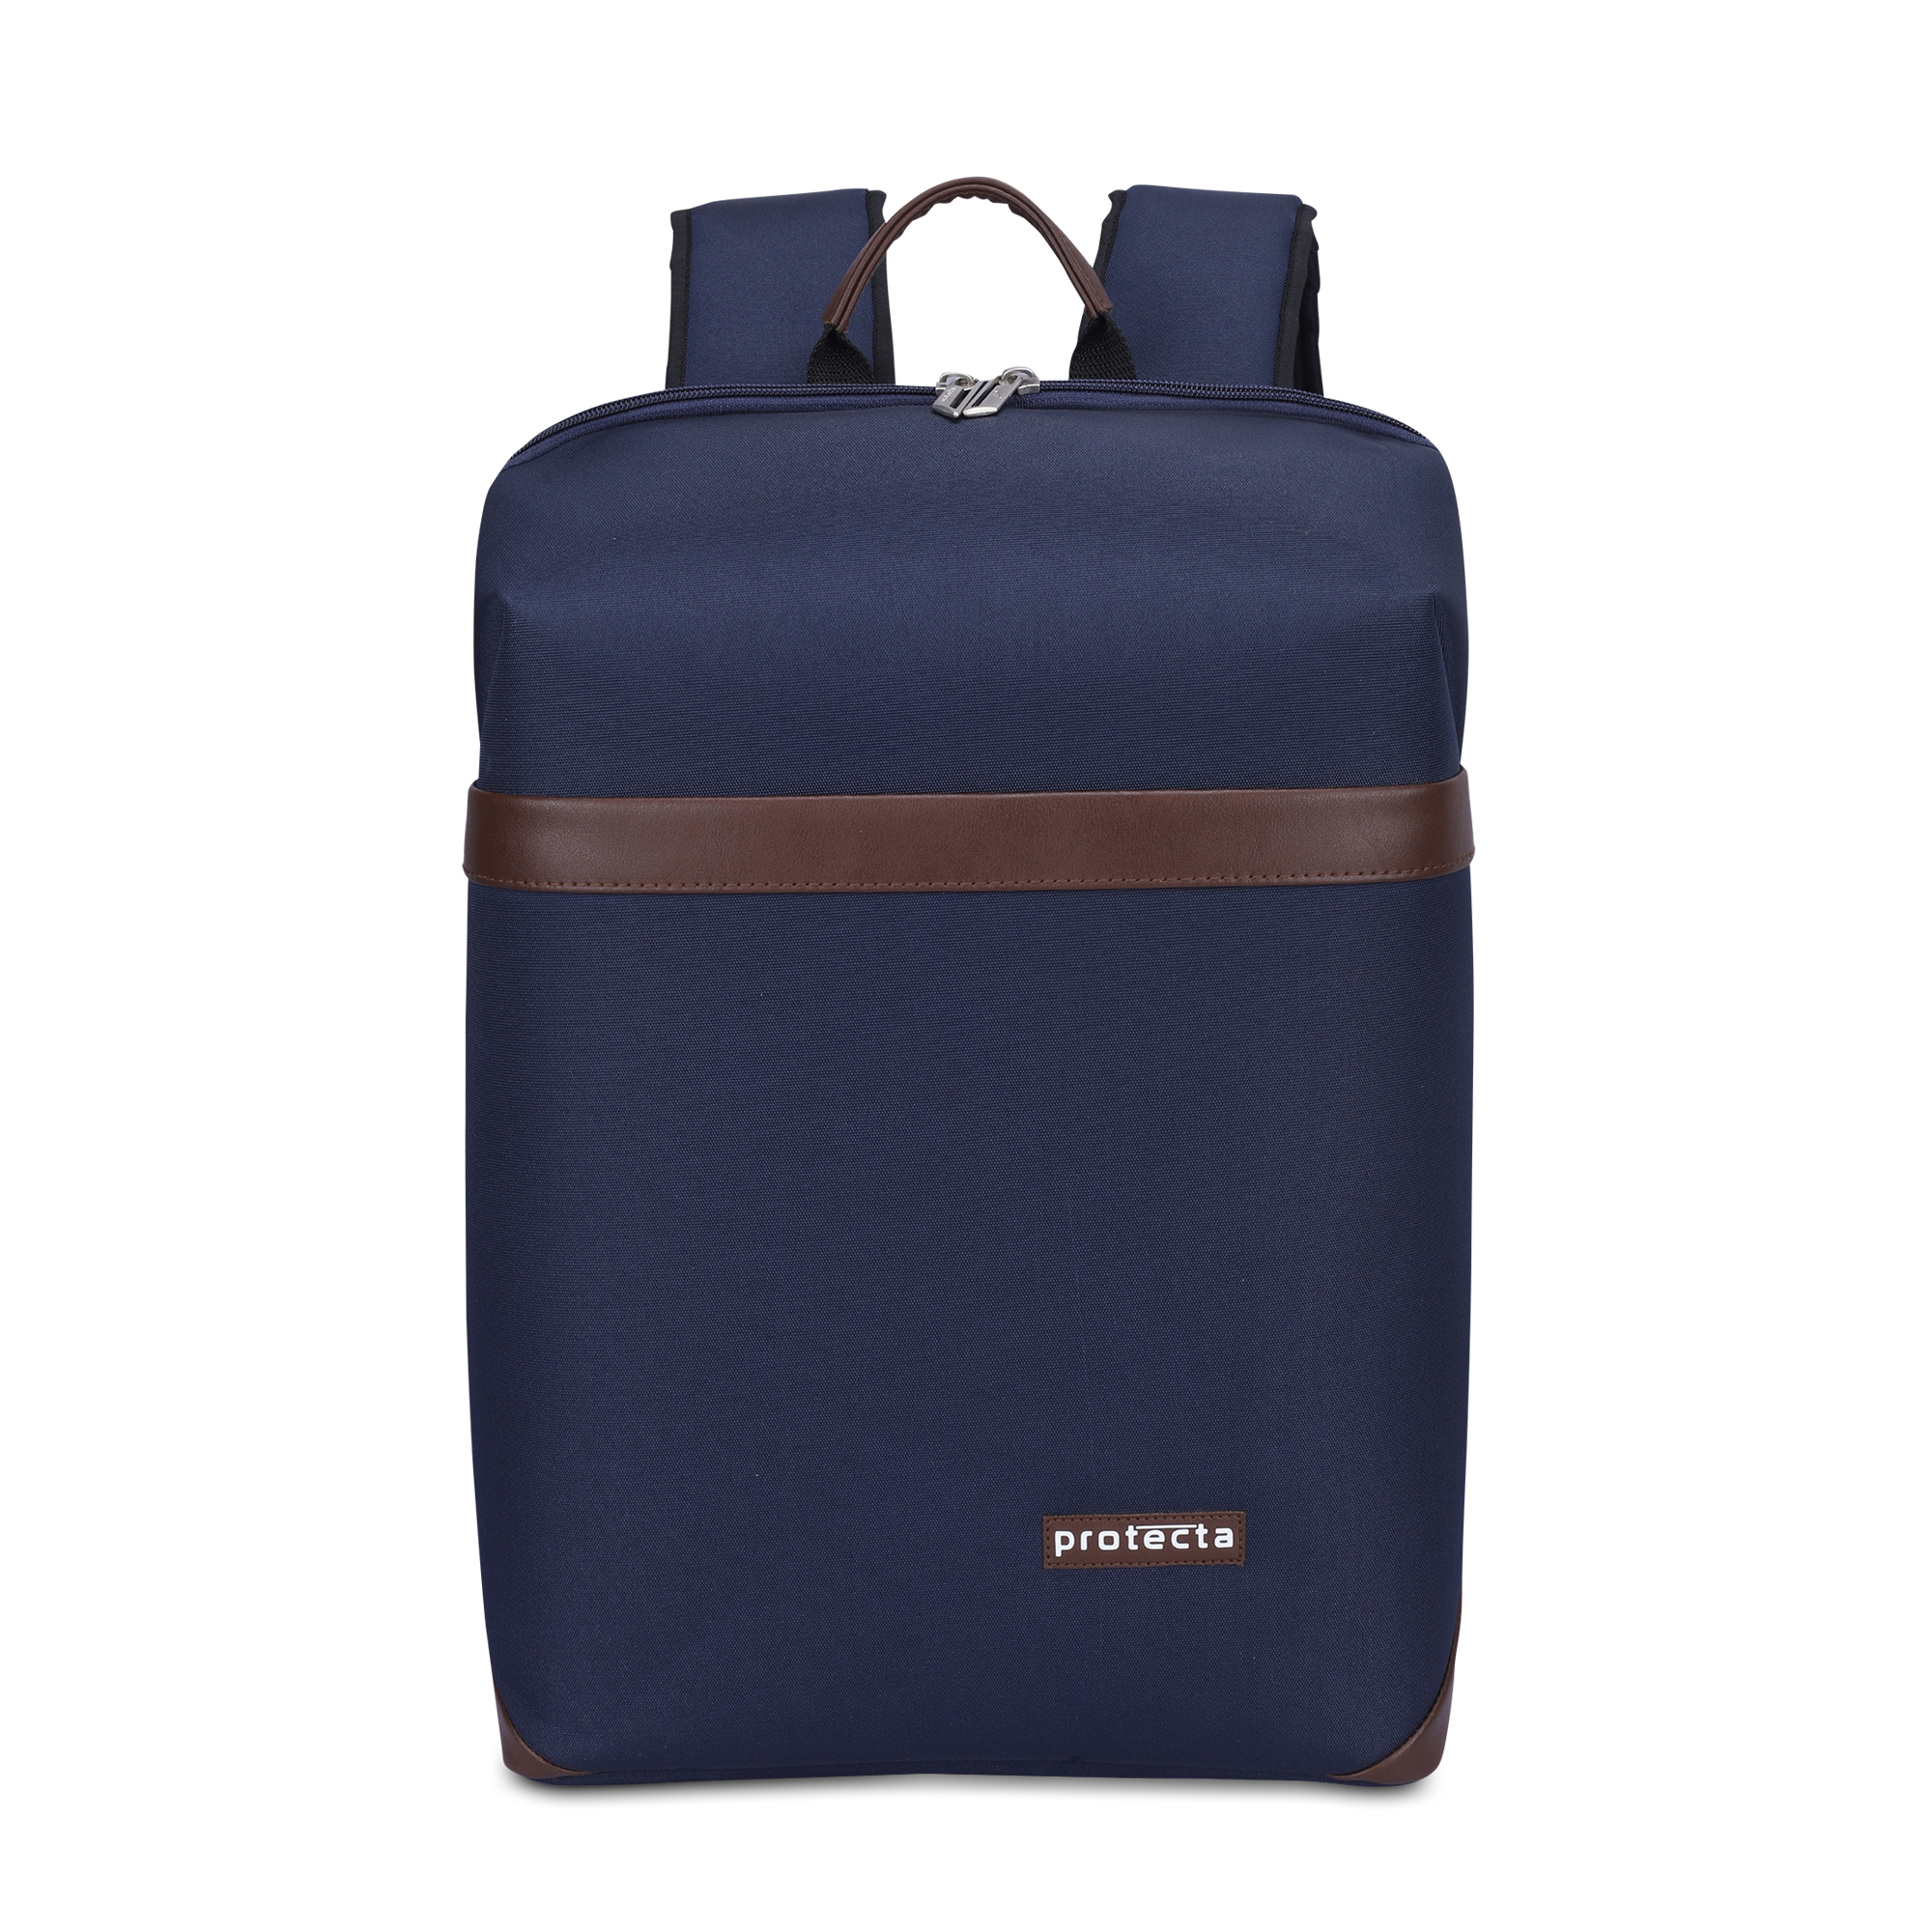 Blue | Protecta Early Lead Anti-Theft Office Laptop Backpack - Main